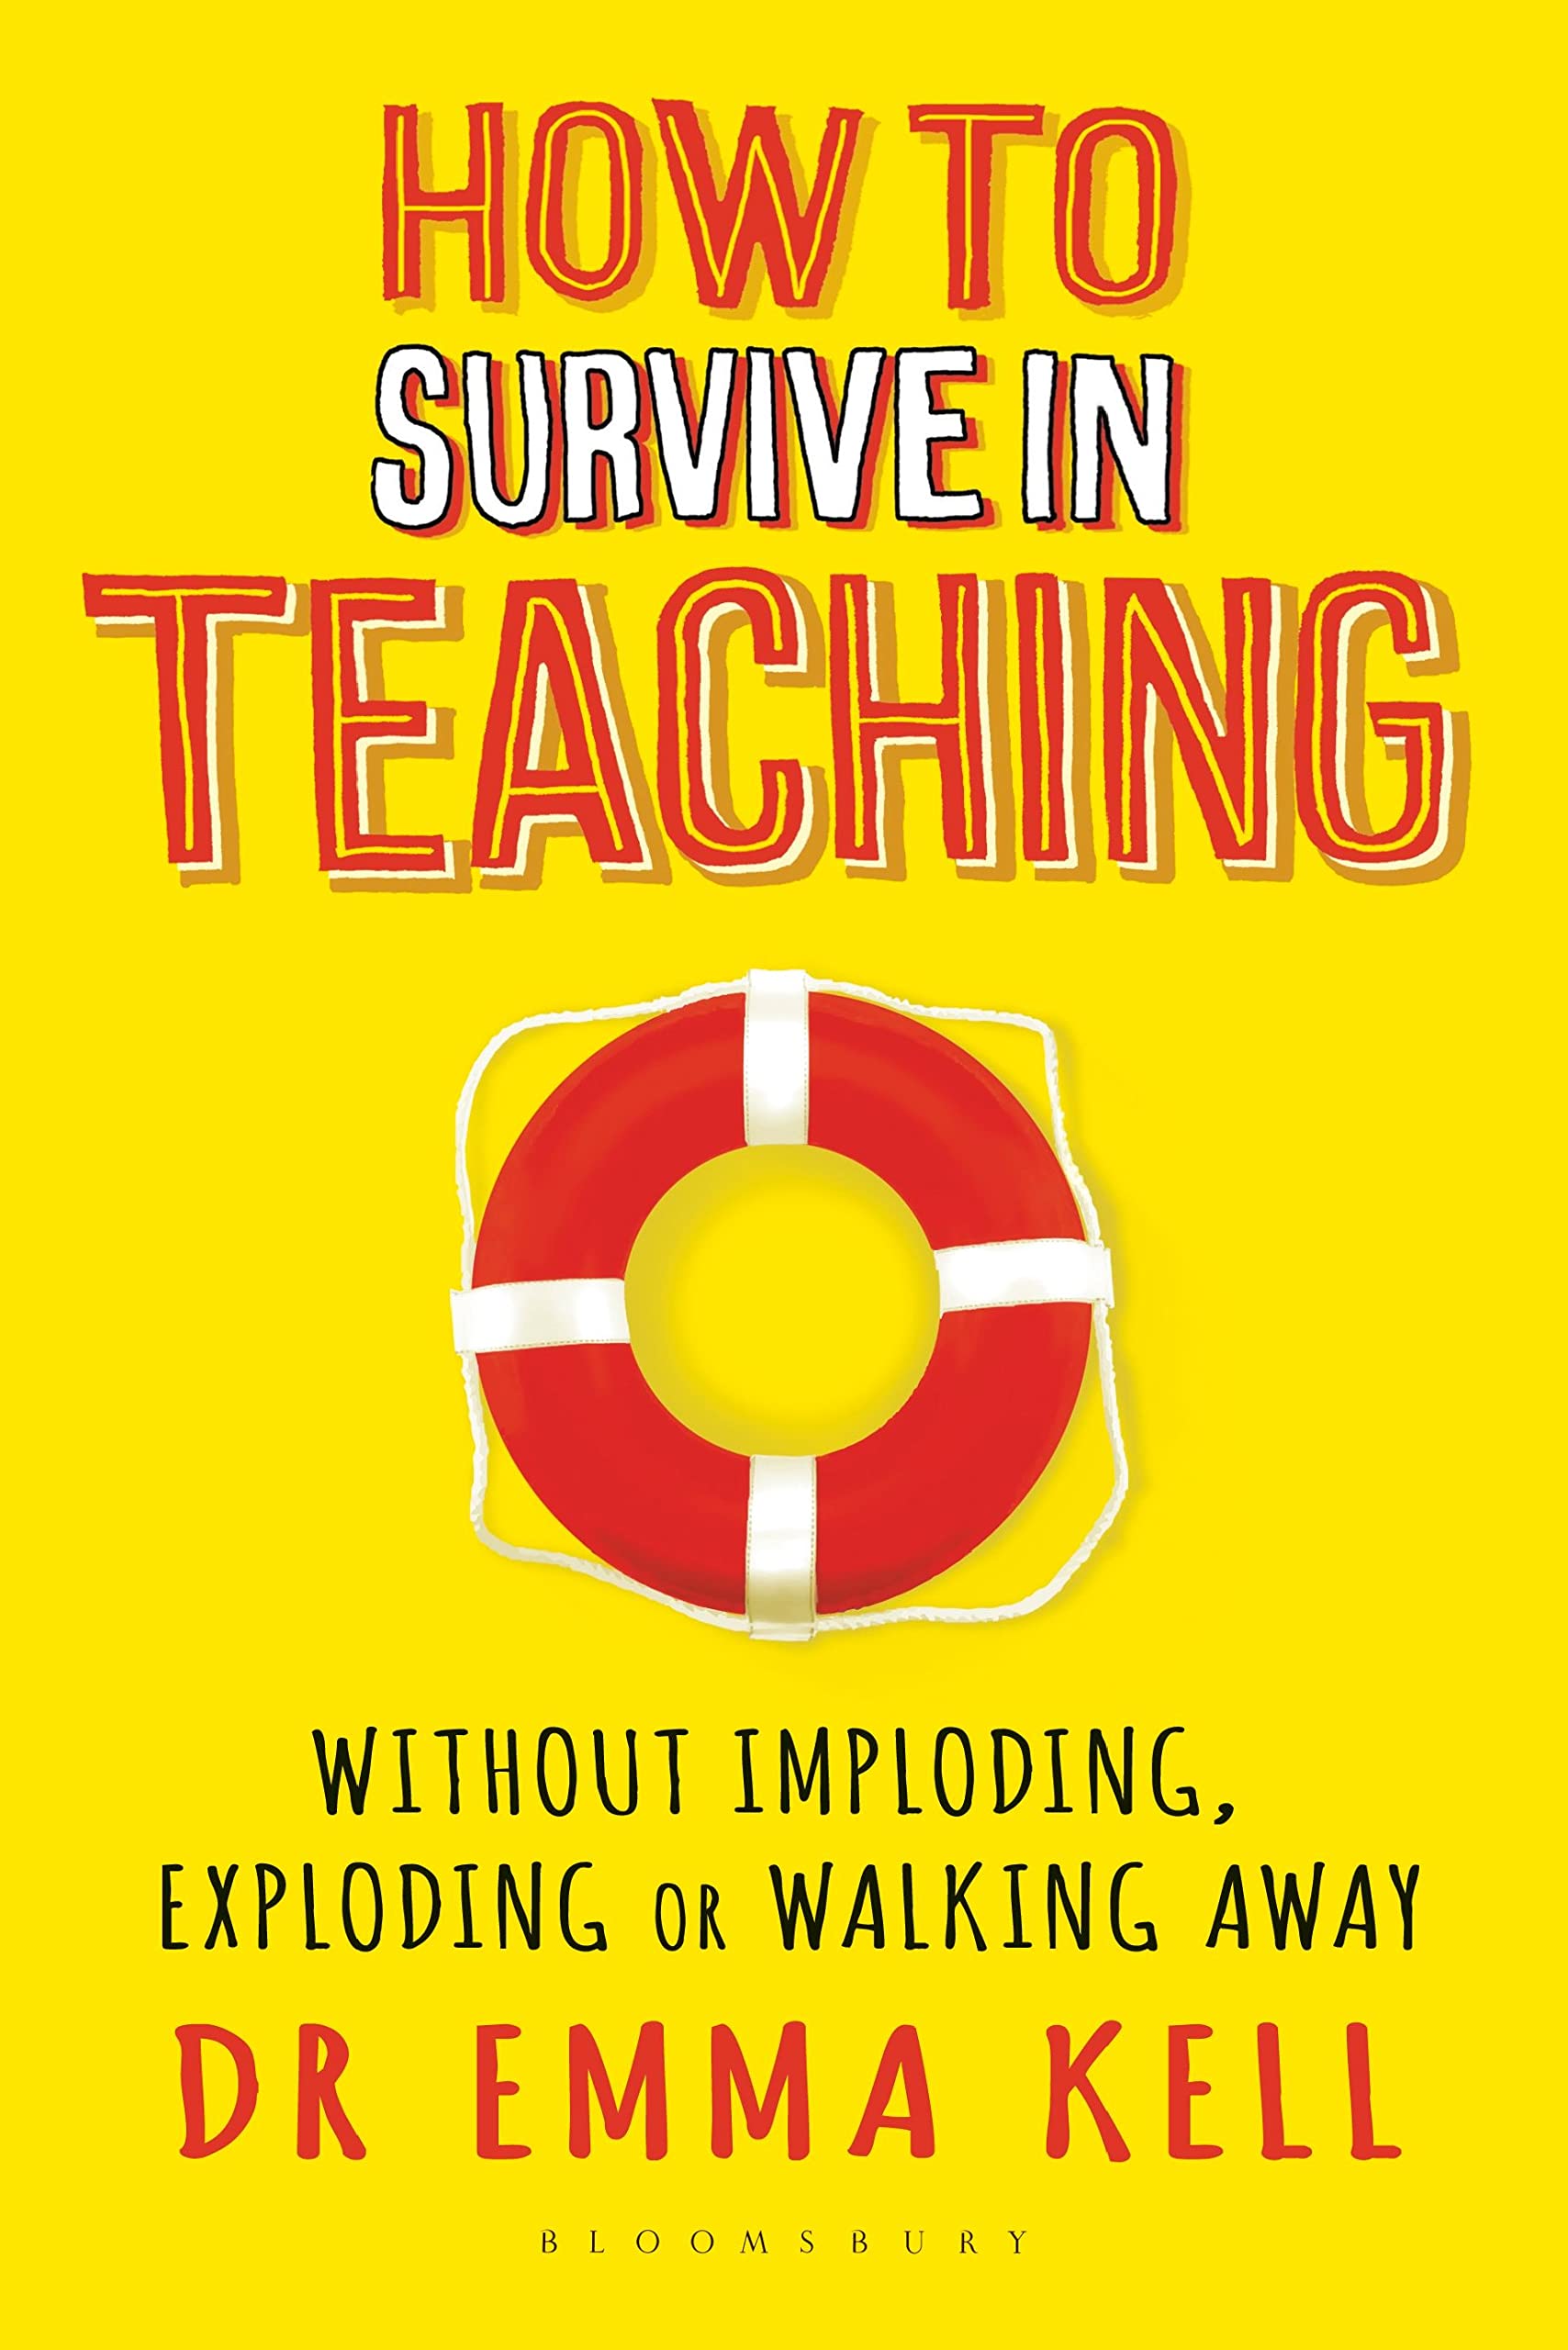 How to survive in teaching: without imploding, exploding or walking away by Dr Emma Kell book image